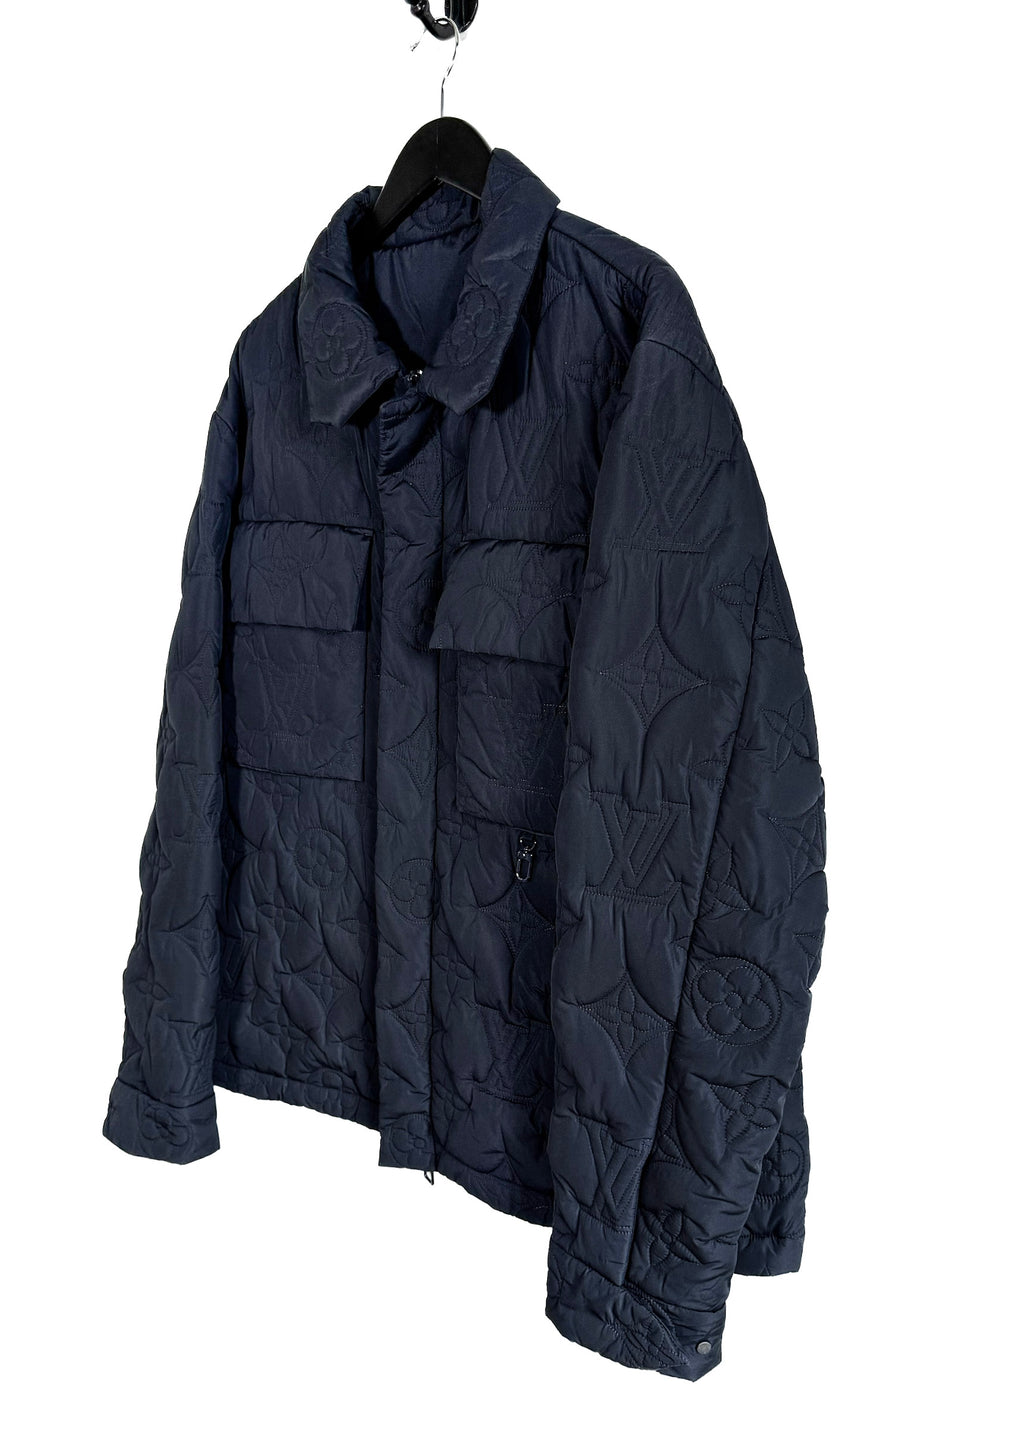 Louis Vuitton Navy Quilted Flowers Blouson